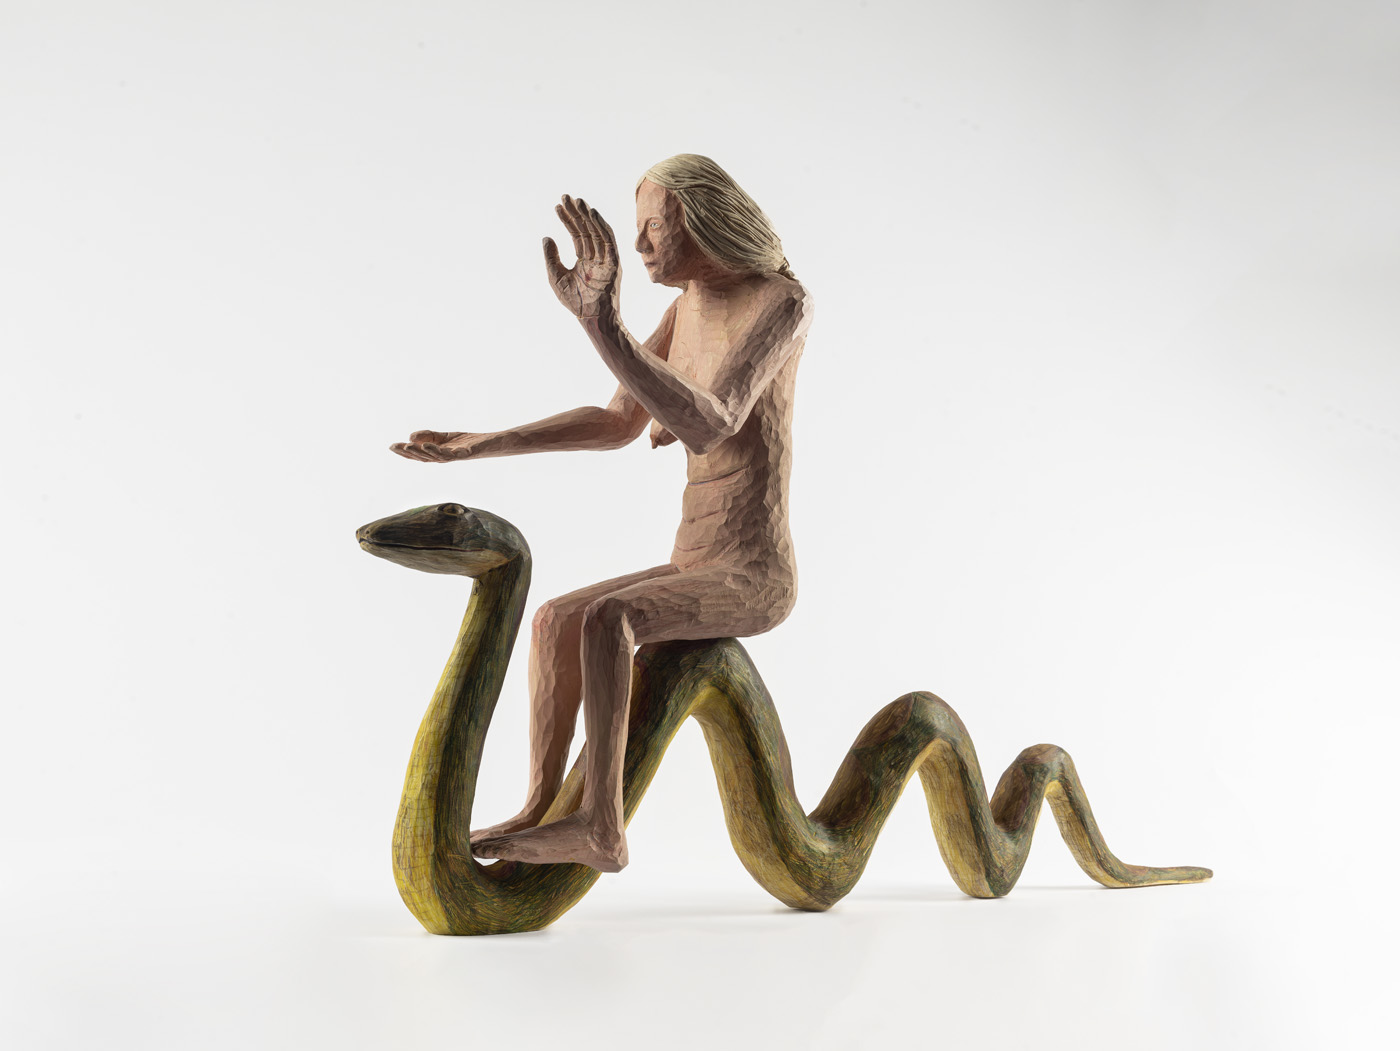 Female figure with blonde hair riding a green snake